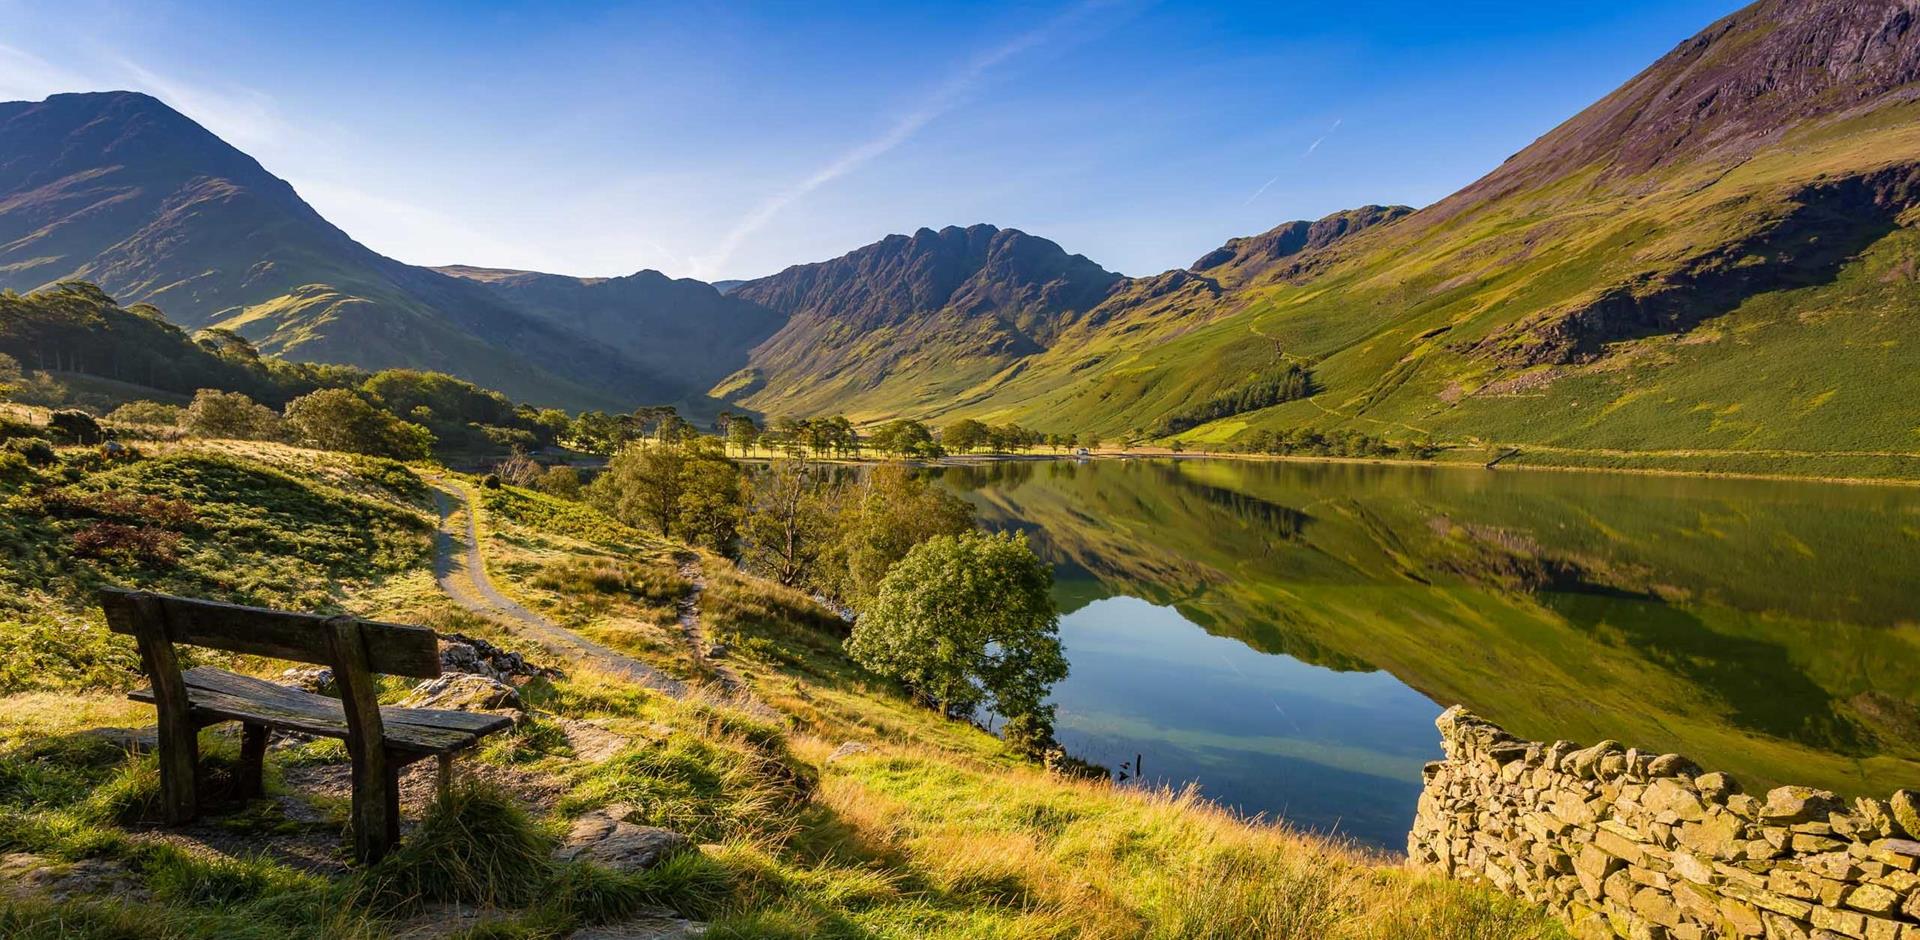 Northern England, Buttermere, The Lake District, Cumbria